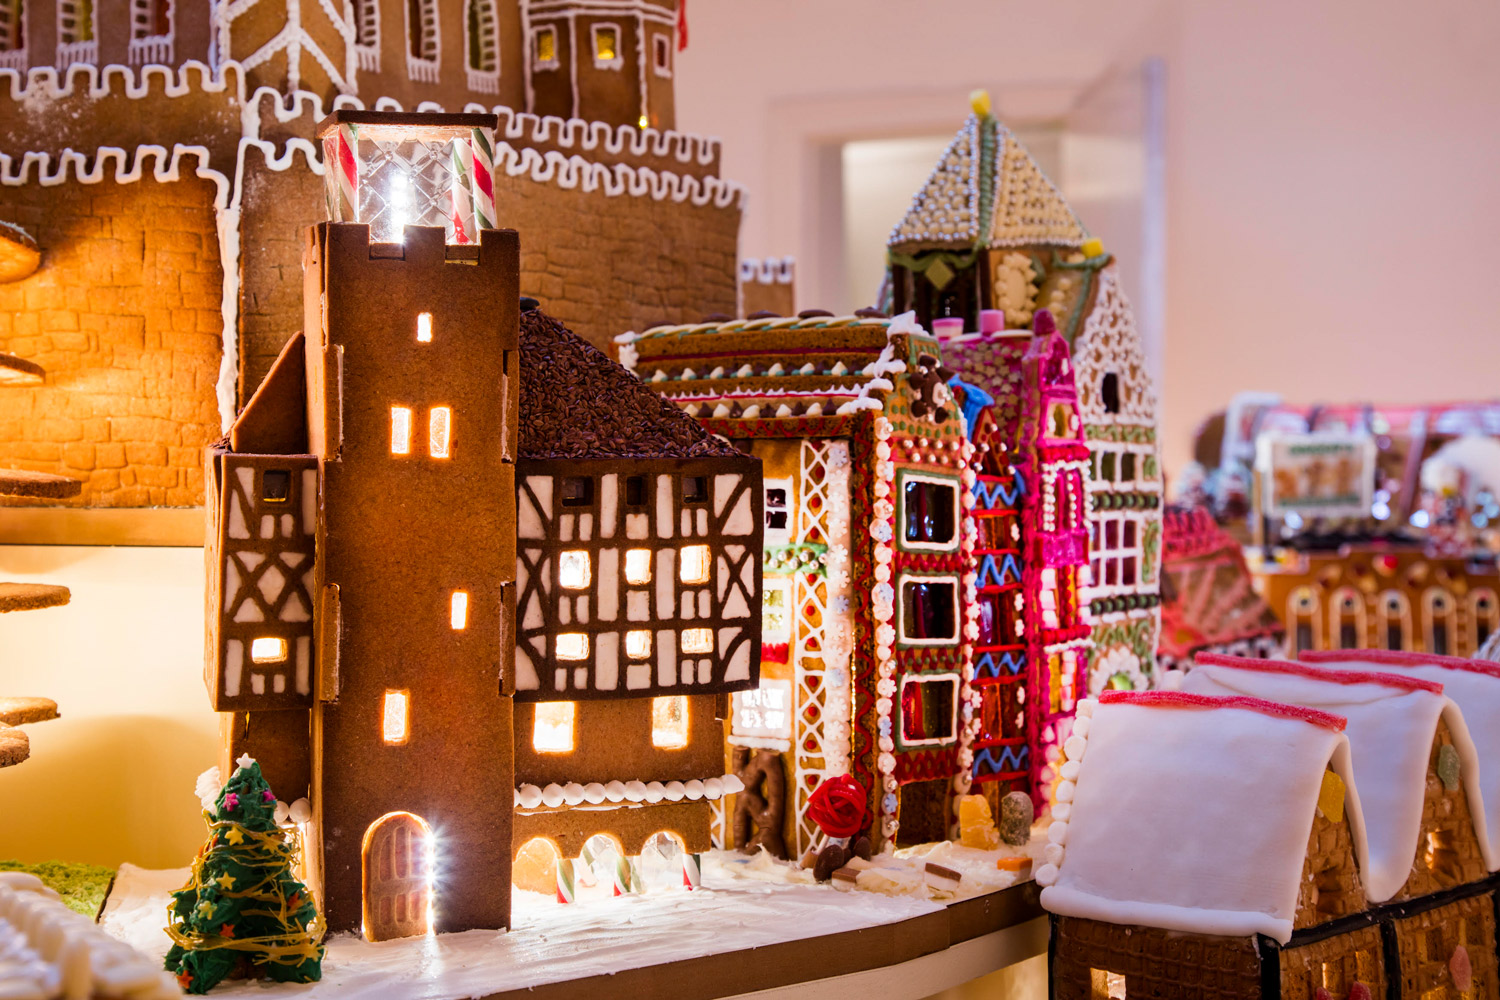 Gingerbread houses with bright lights